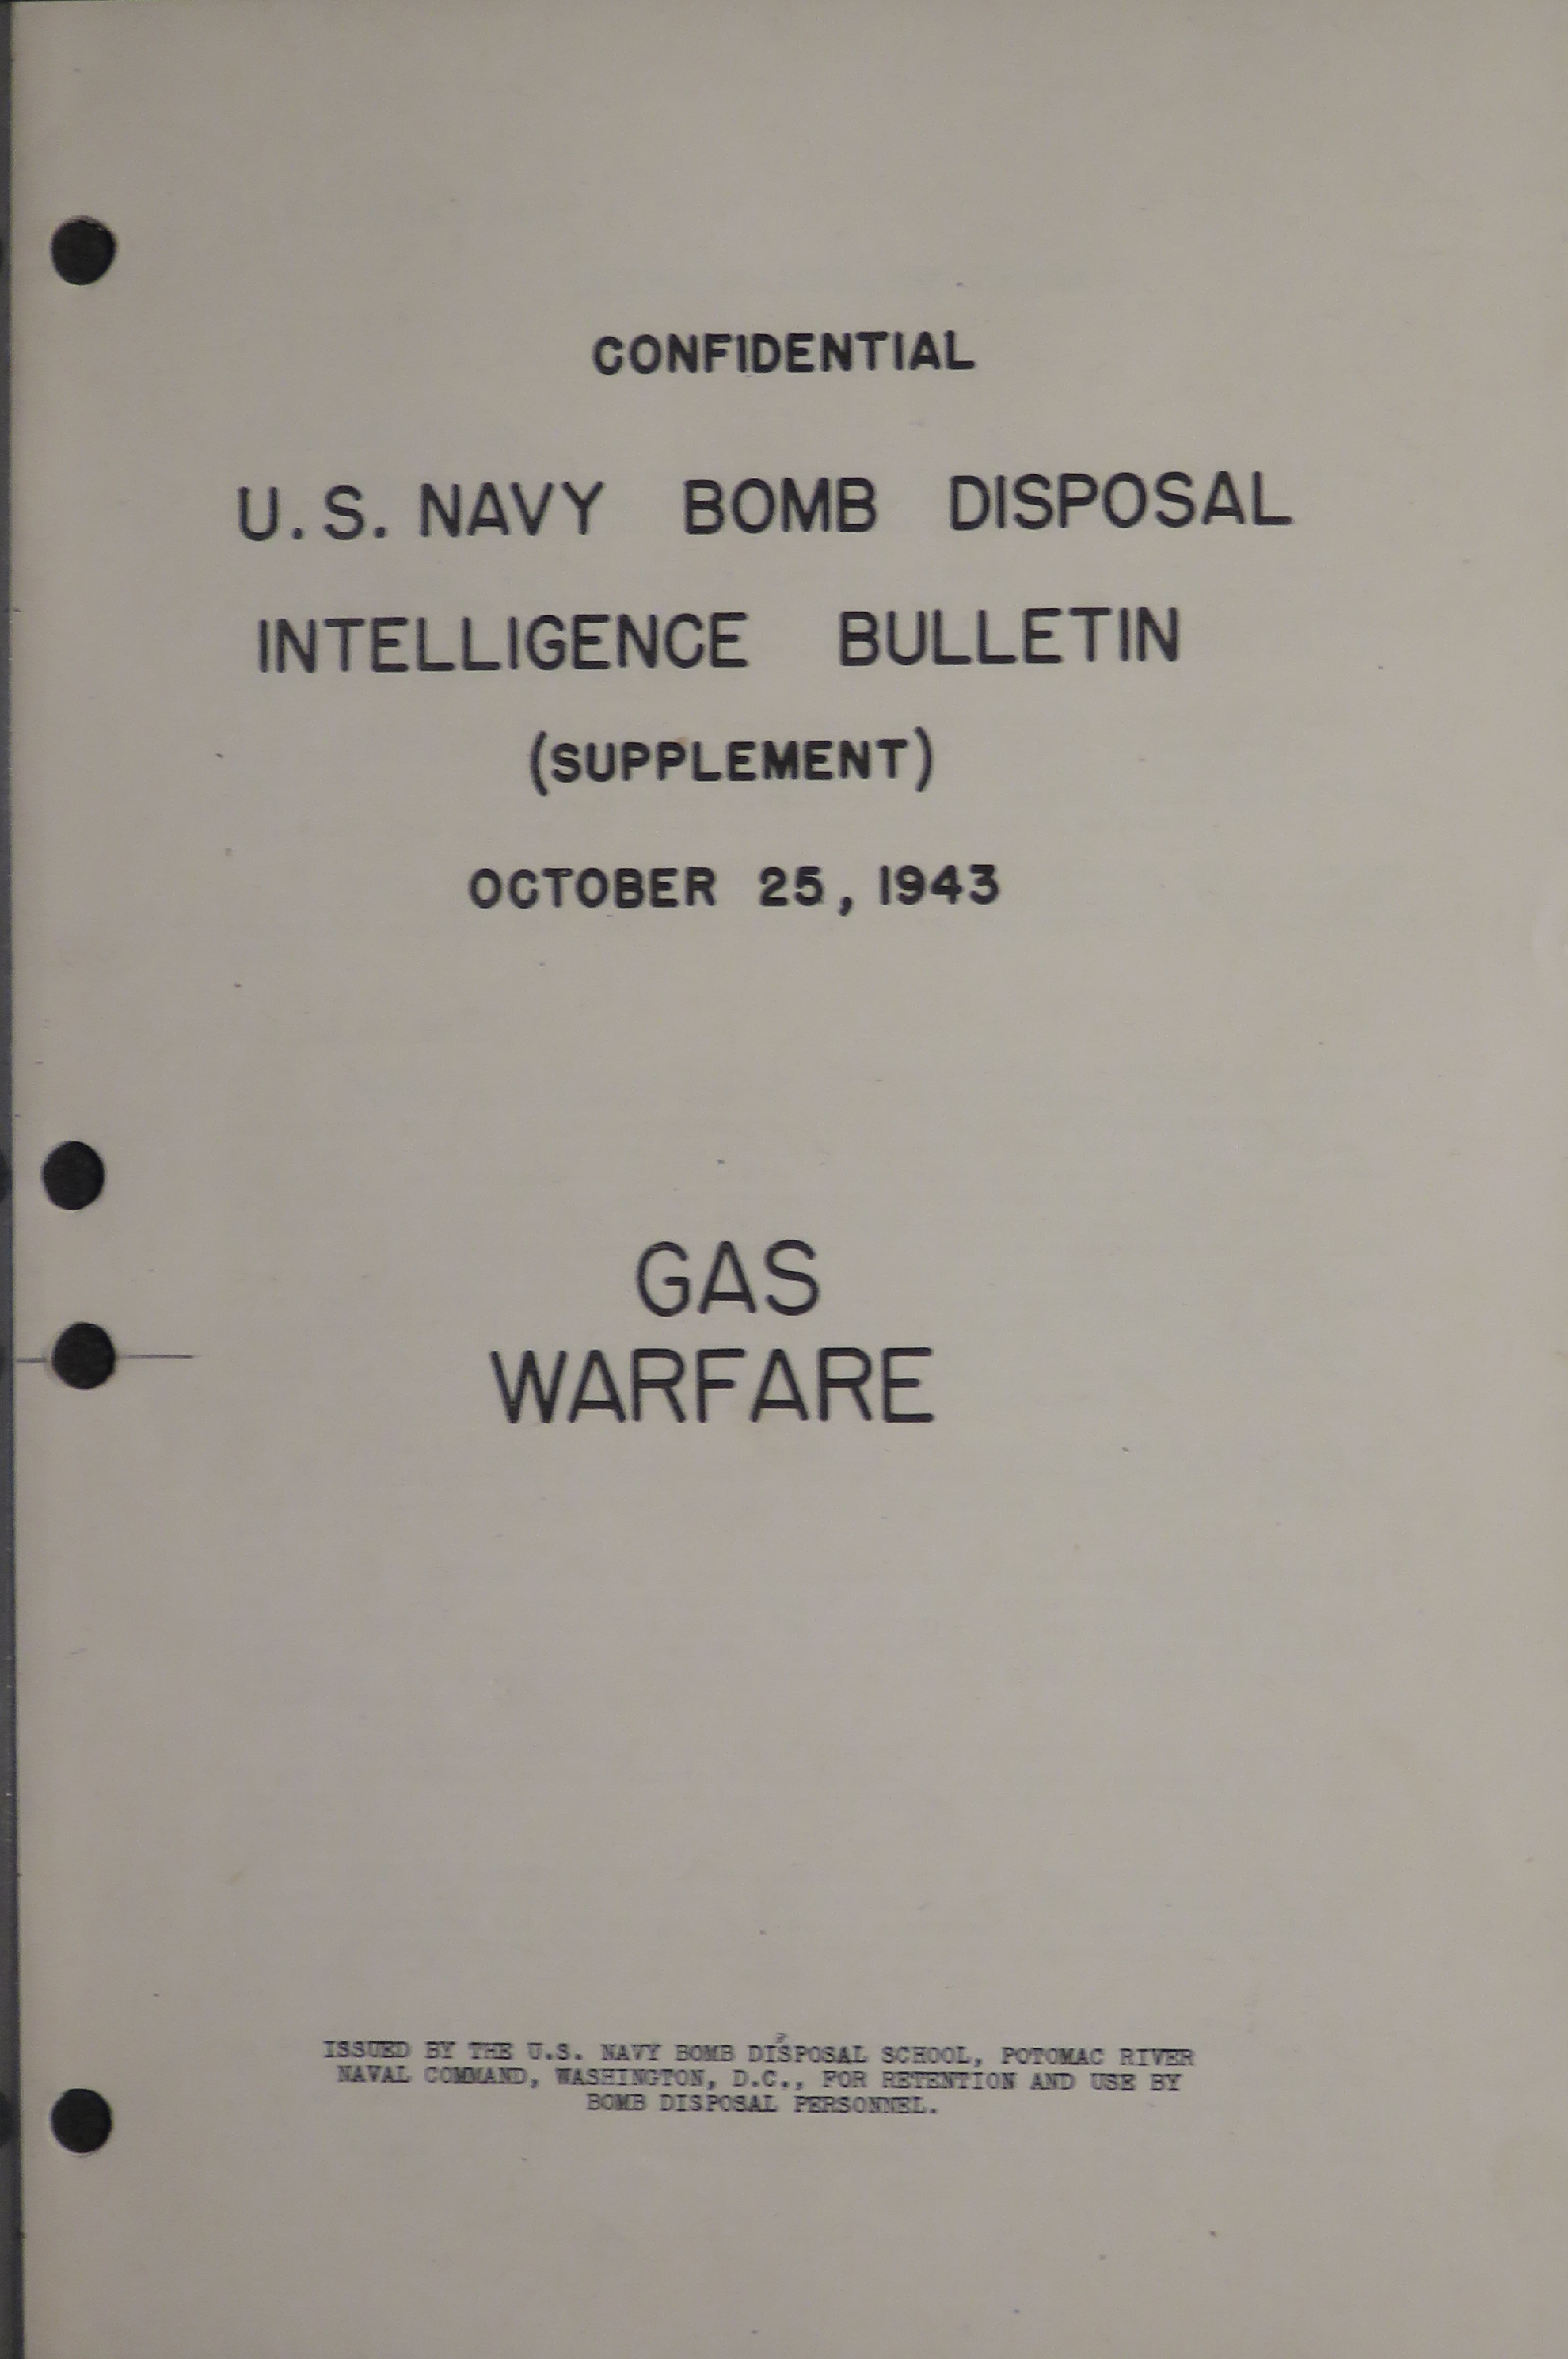 Sample page 1 from AirCorps Library document: U.S. Navy Bomb Disposal Intelligence Bulletin for Gas Warfare